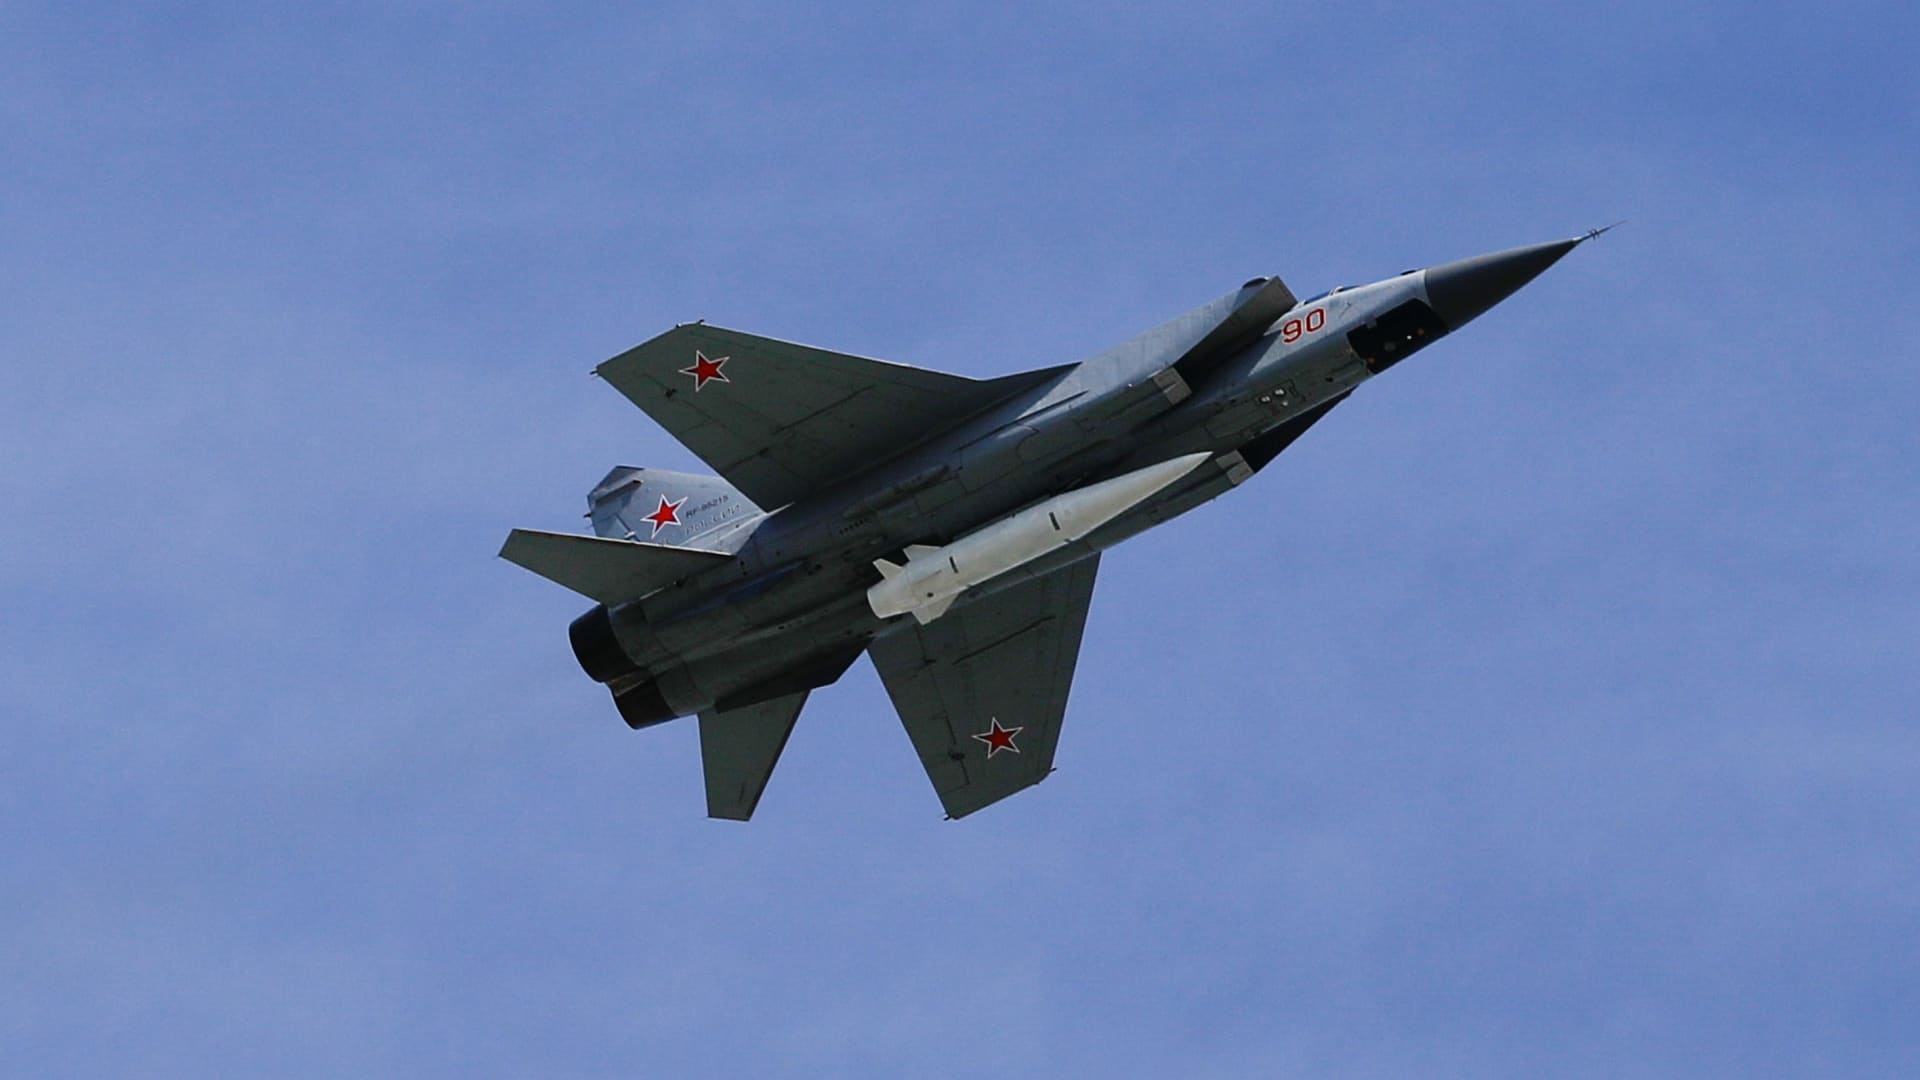 A MiG-31K fighter jet with a Kinzhal hypersonic missile flies over Moscow's Red Square during the Victory Day military parade in 2018.